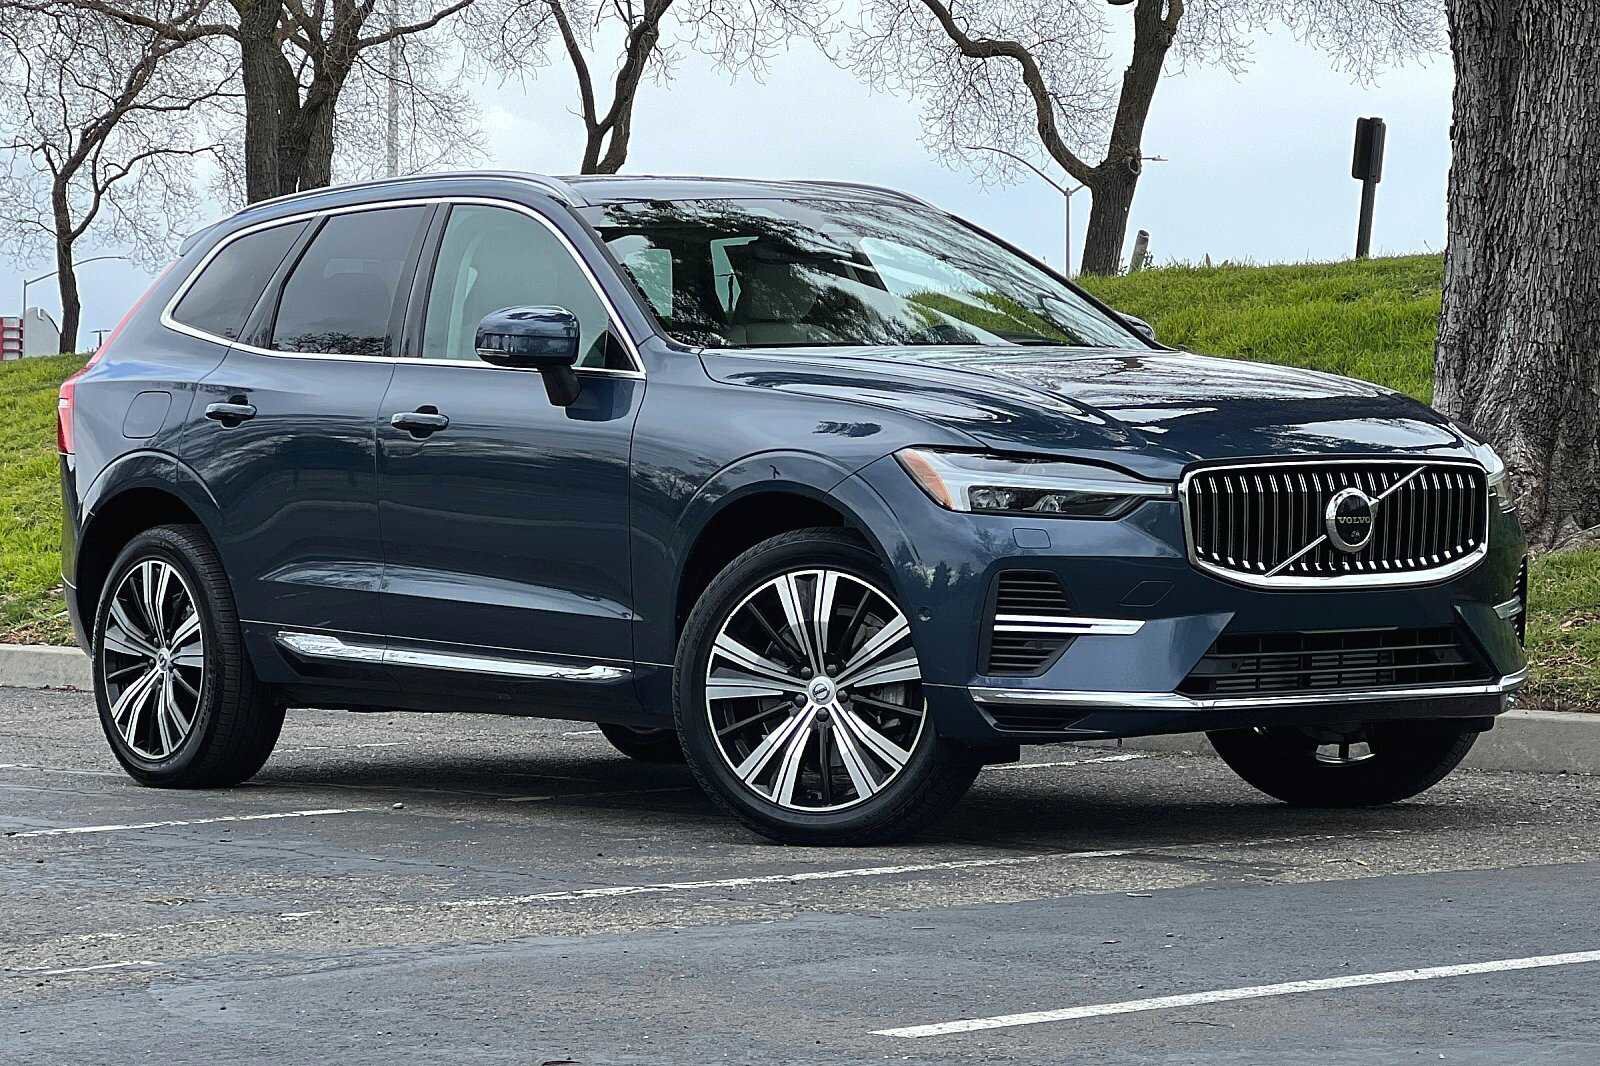 Pre-Owned 2022 Volvo XC60 Recharge Plug-In Hybrid Inscription SUV in  Merriam #Q03606A | Hendrick Chevrolet Shawnee Mission